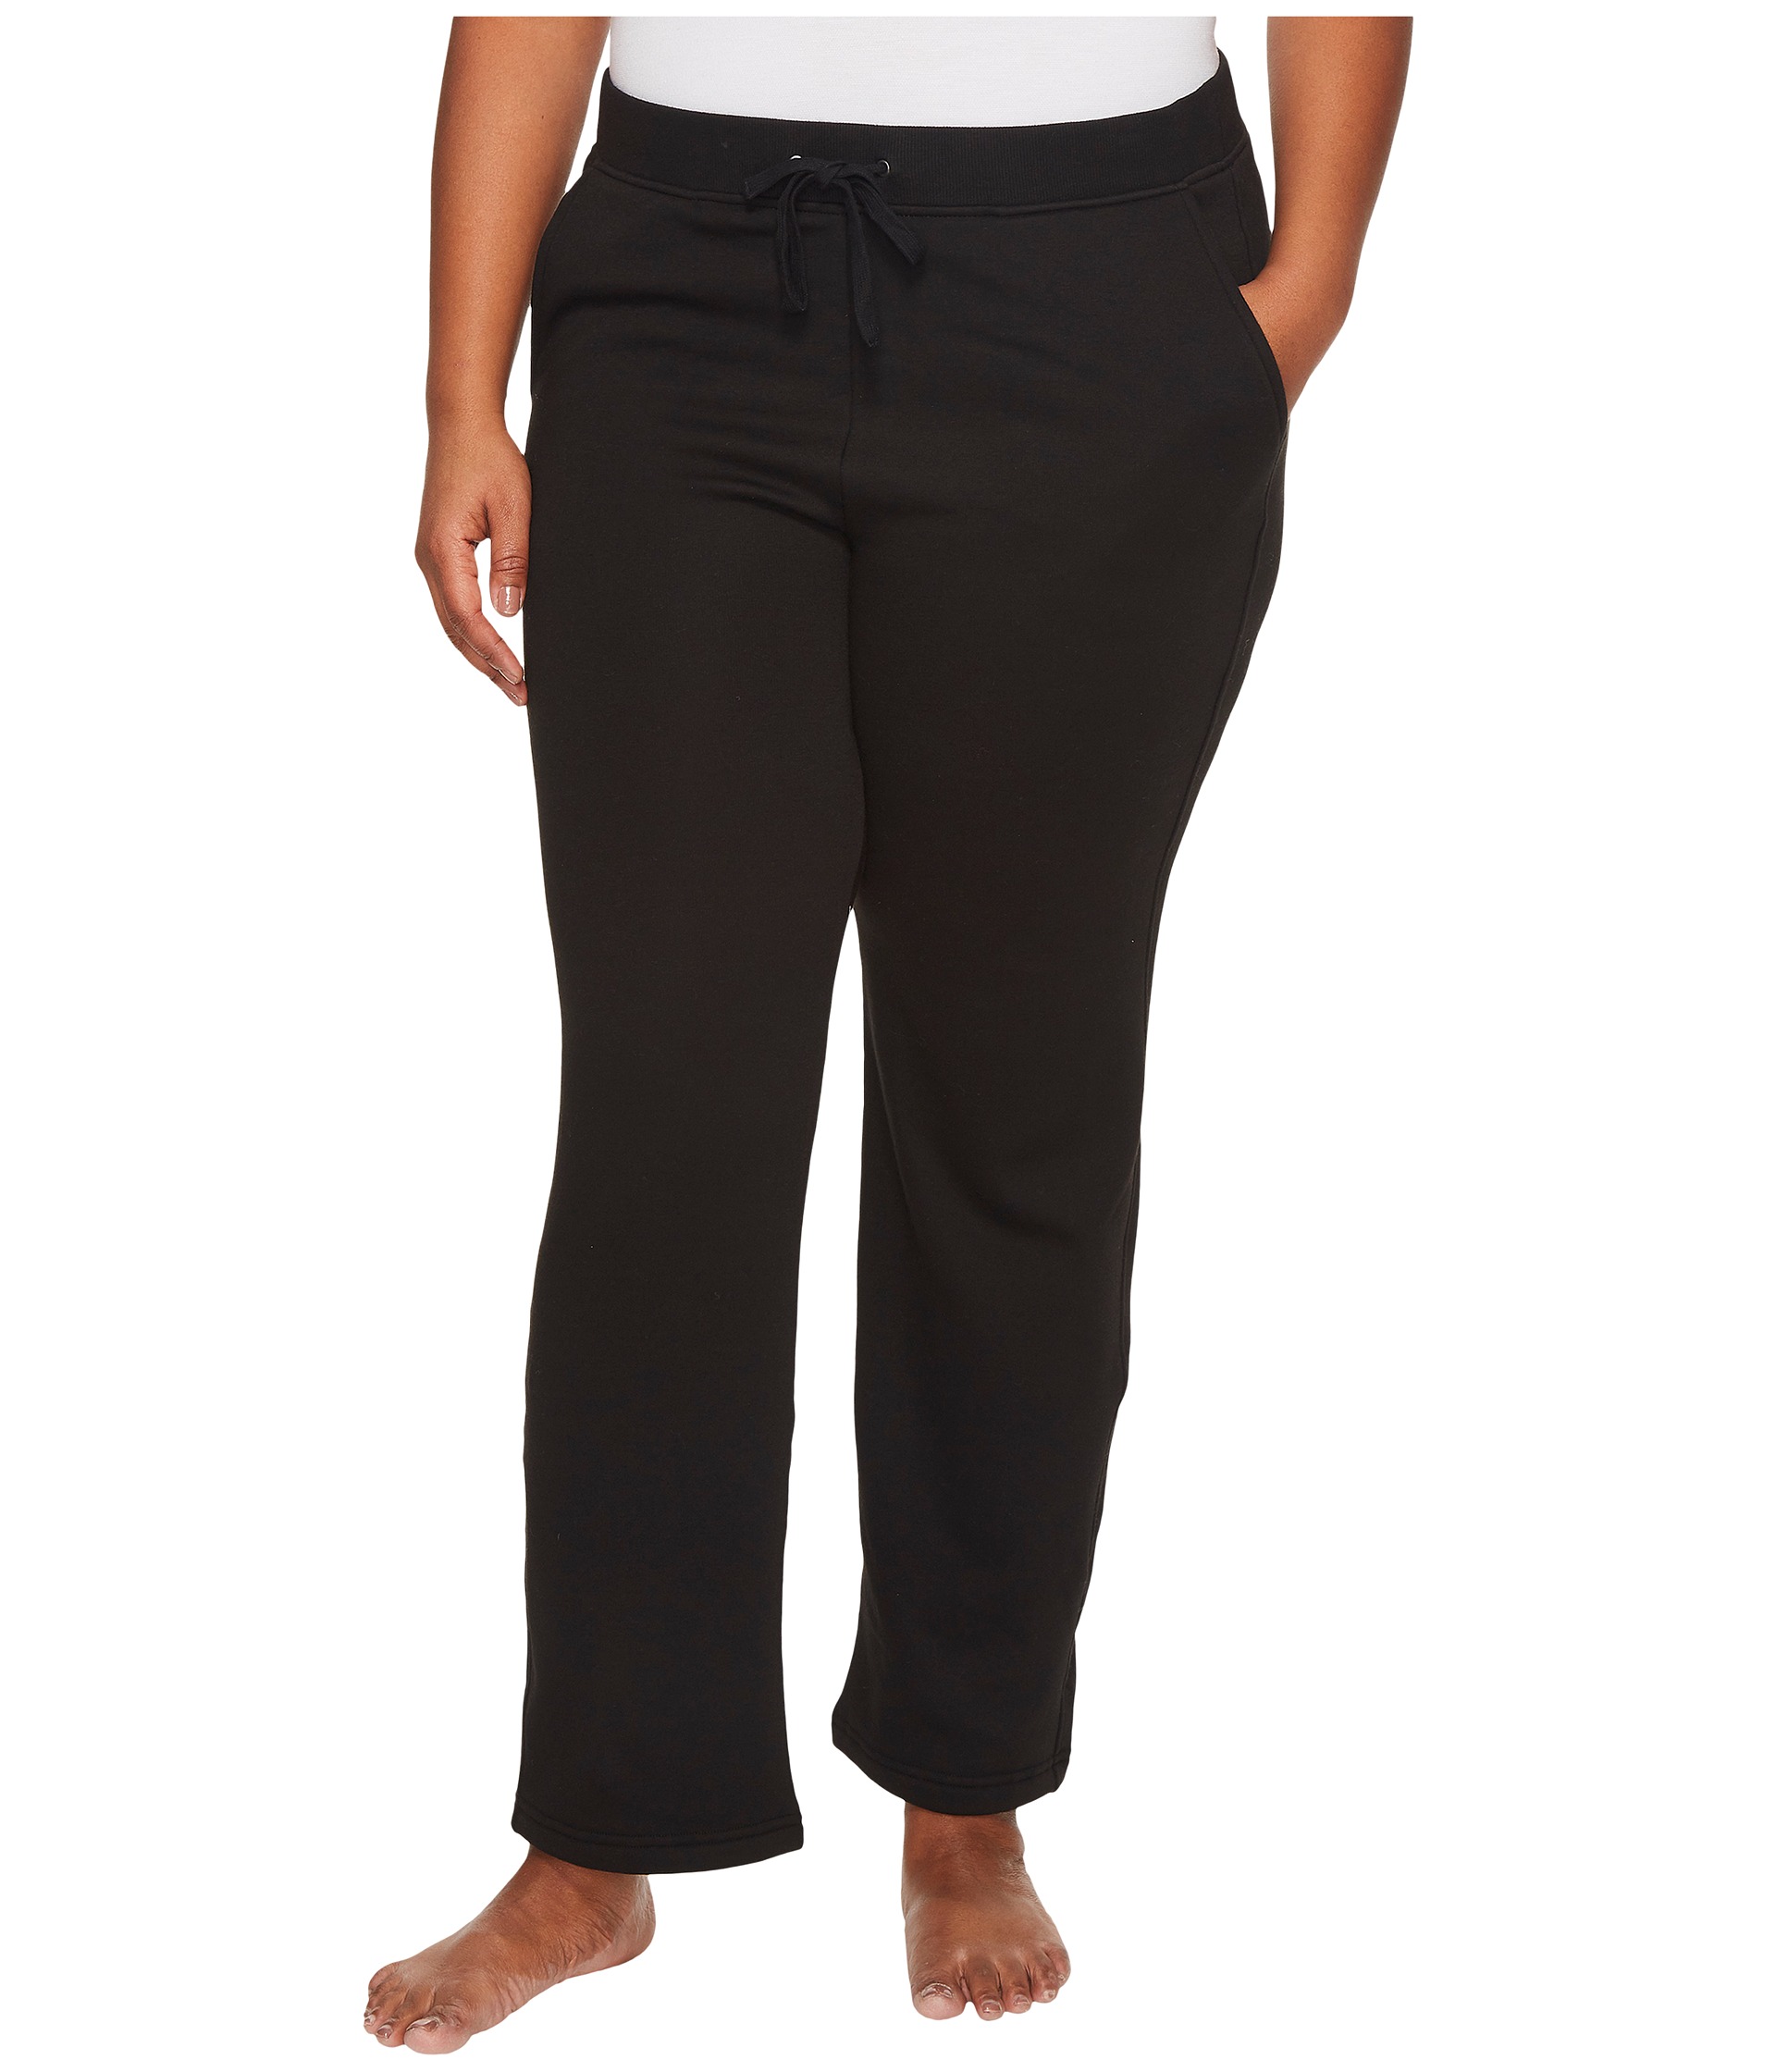 UGG Plus Size Penny Pants at Zappos.com